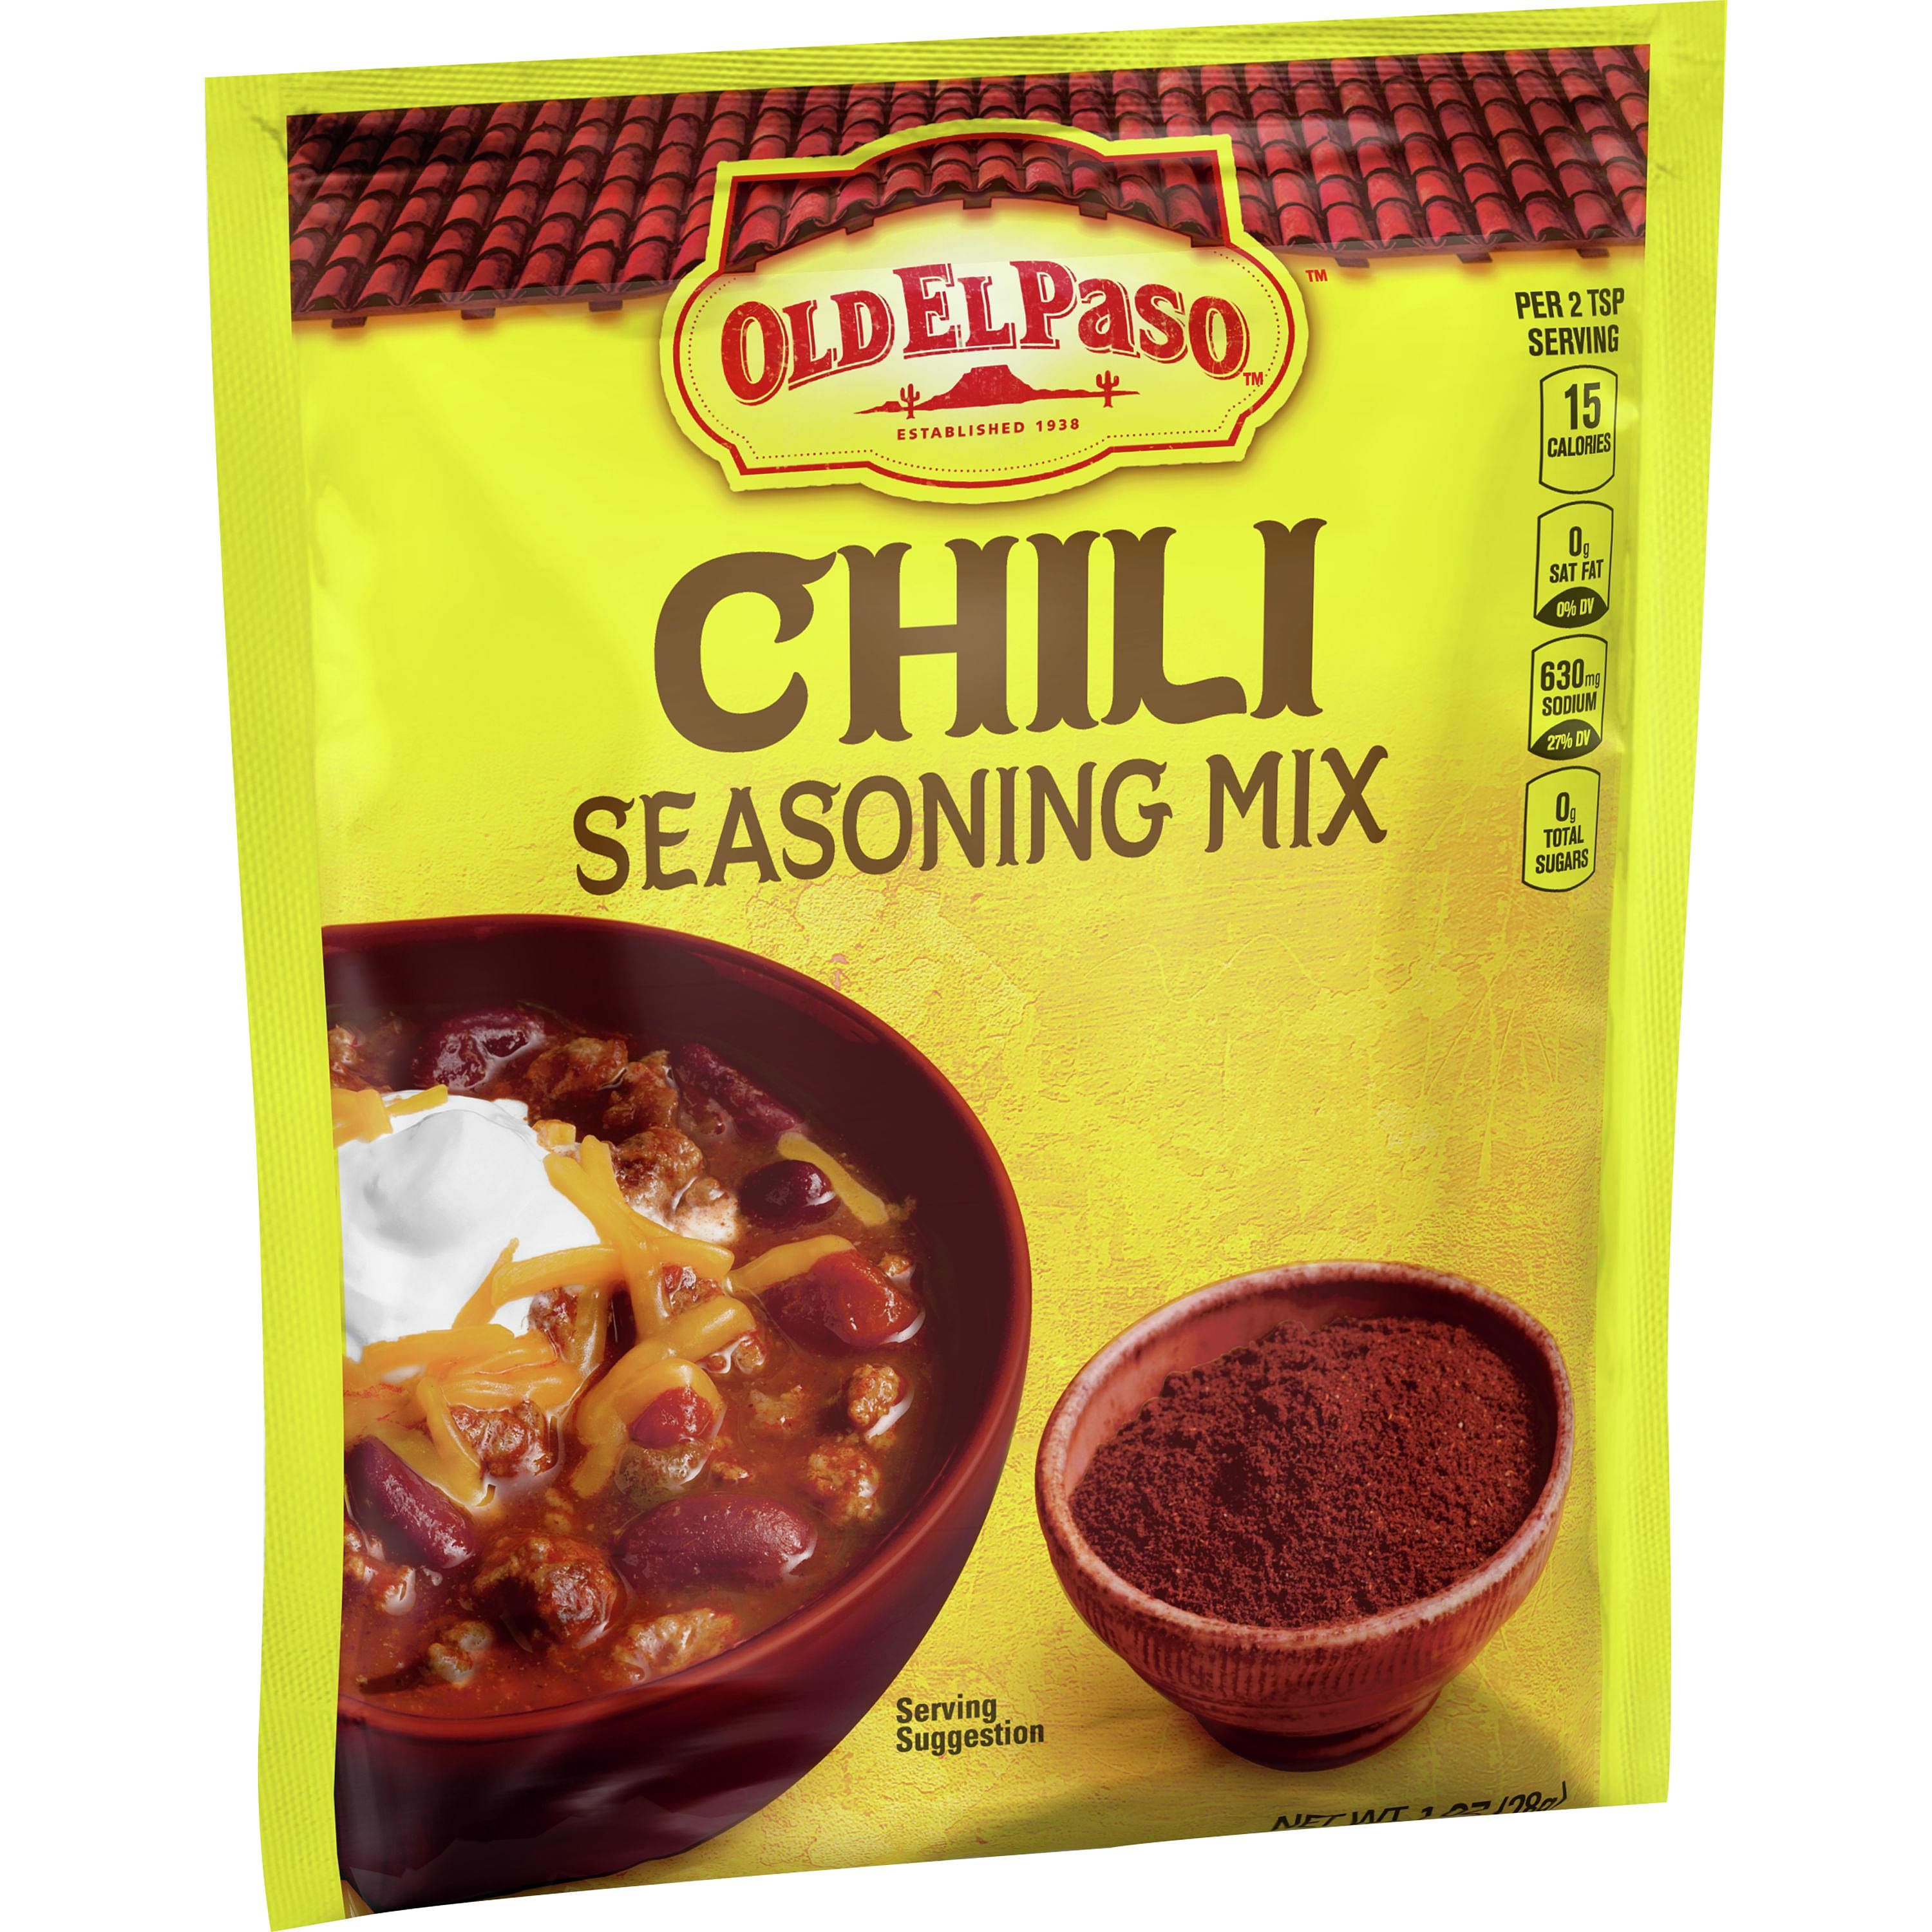 uheldigvis side Justerbar Chili Seasoning Mix - Authentic Mexican Dishes - Old El Paso